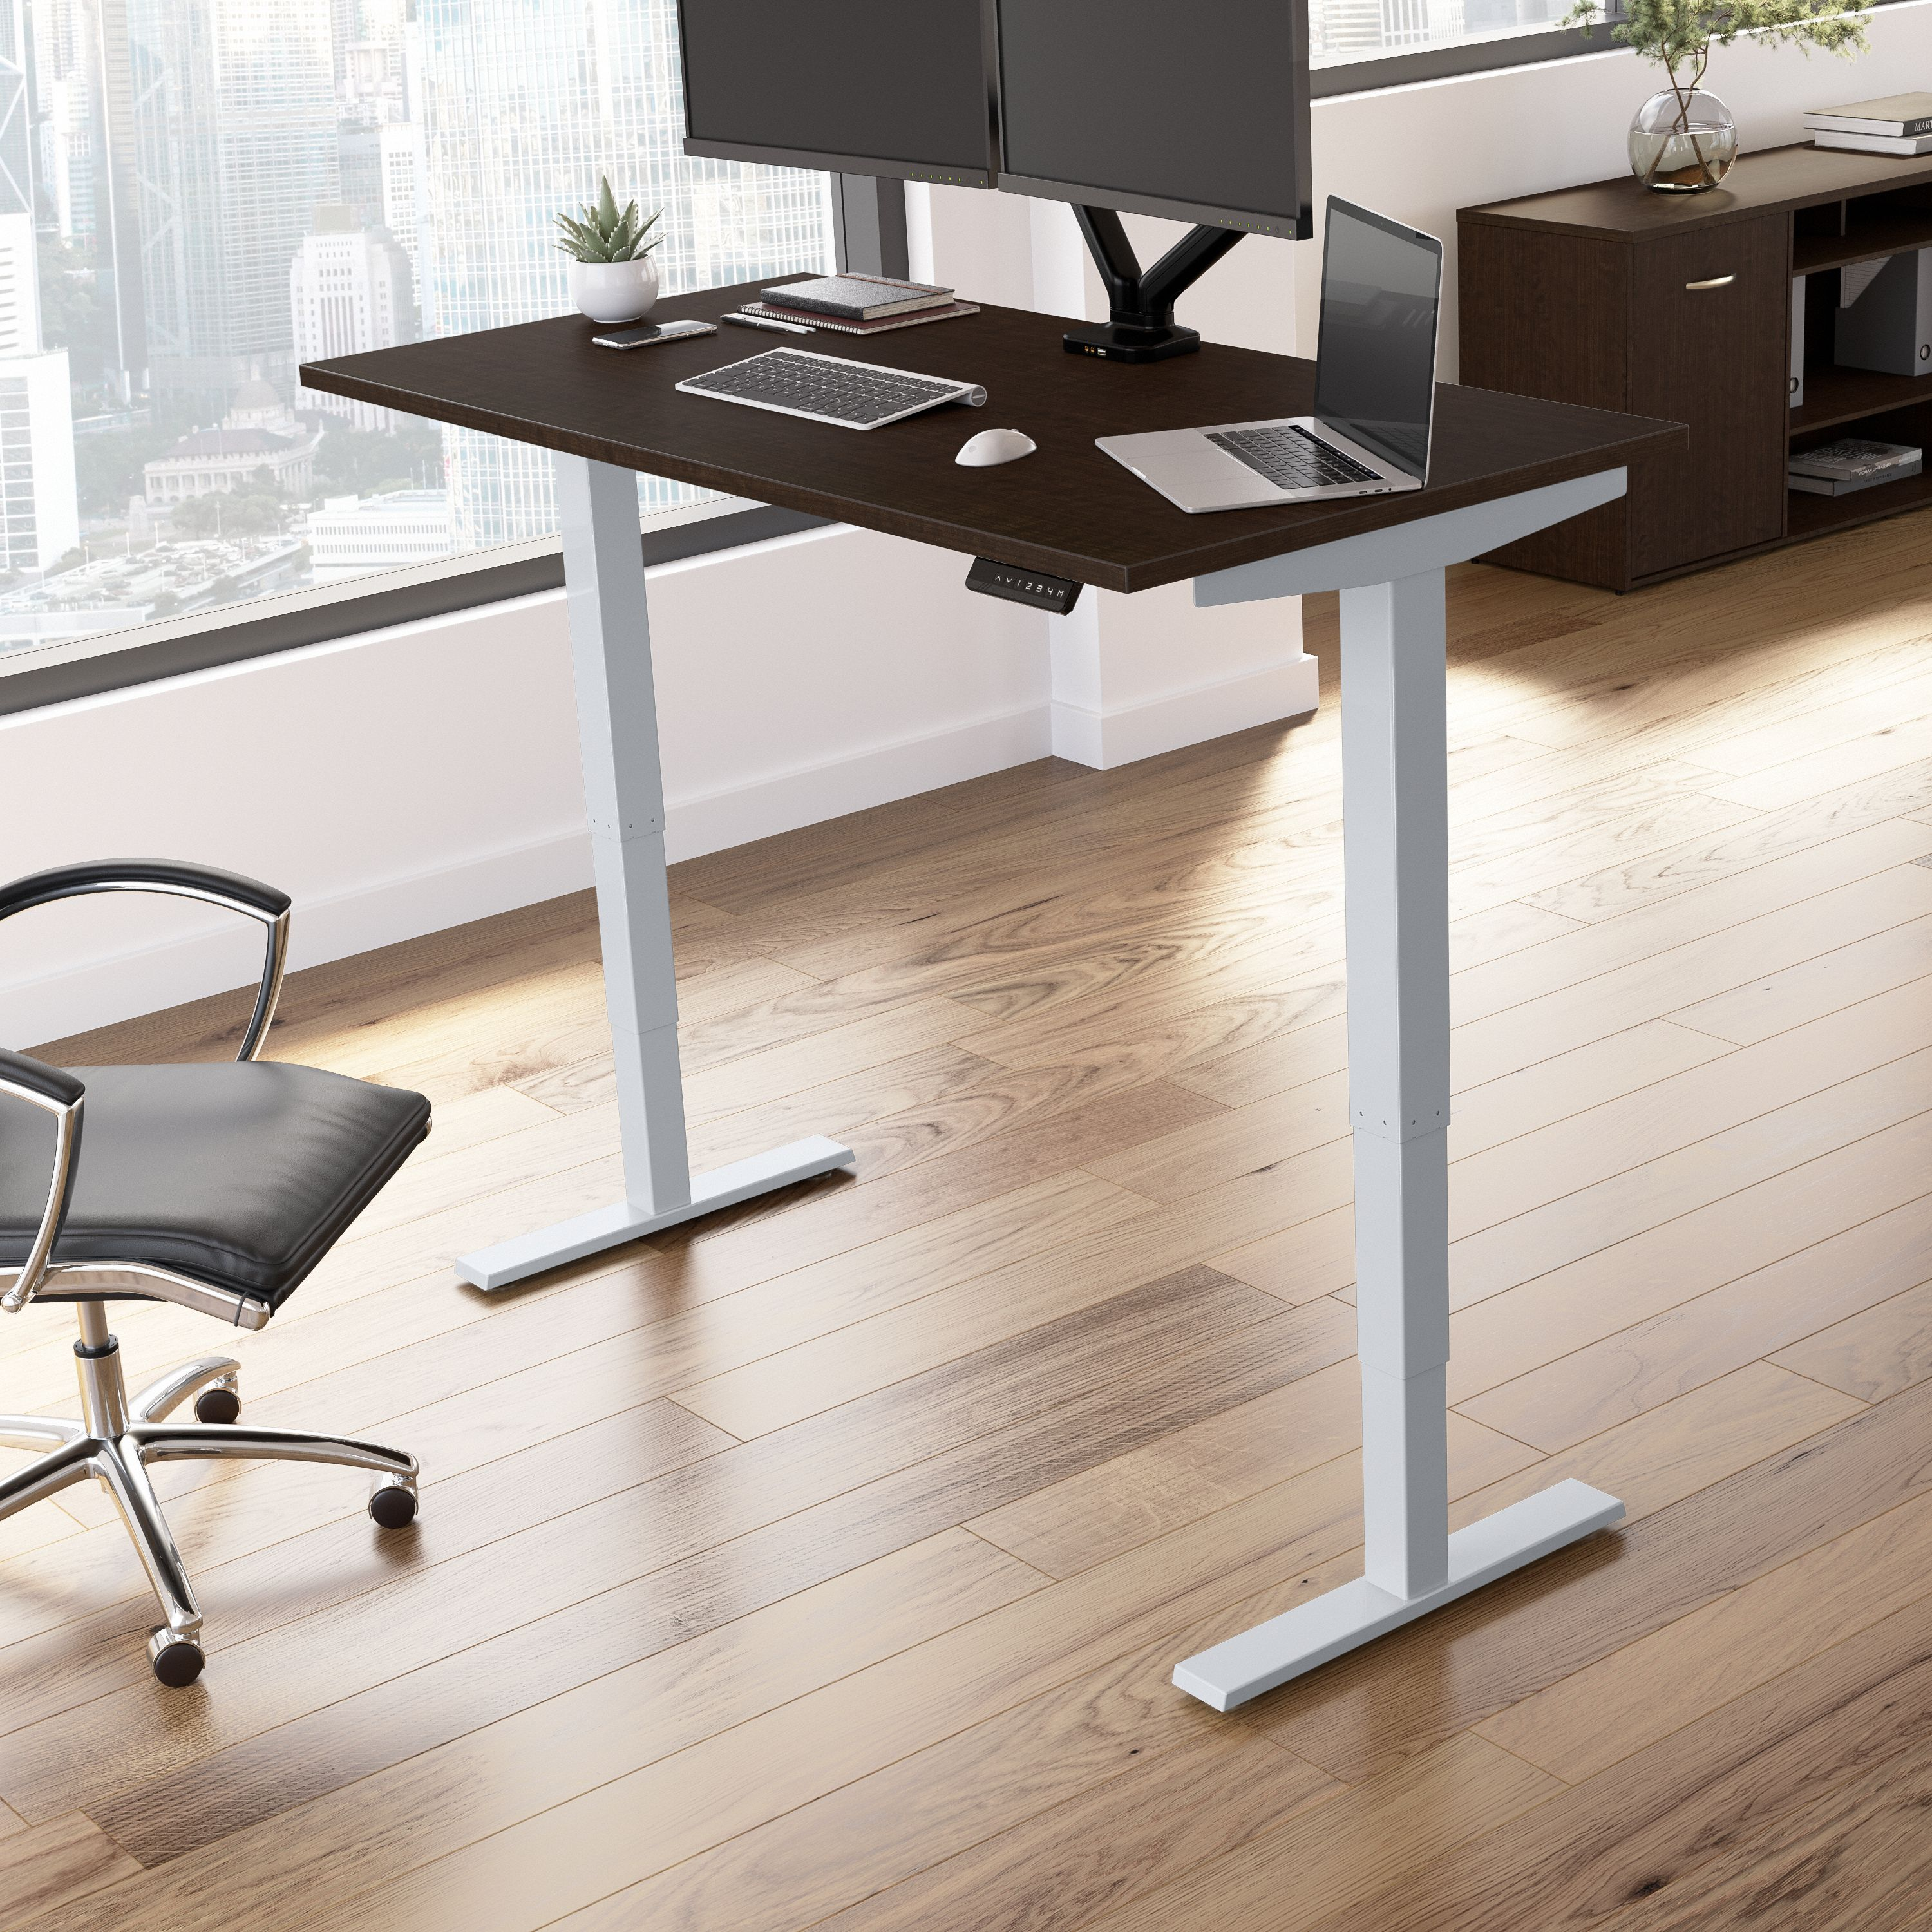 Shop Move 40 Series by Bush Business Furniture 60W x 30D Electric Height Adjustable Standing Desk 01 M4S6030MRSK #color_mocha cherry/cool gray metallic